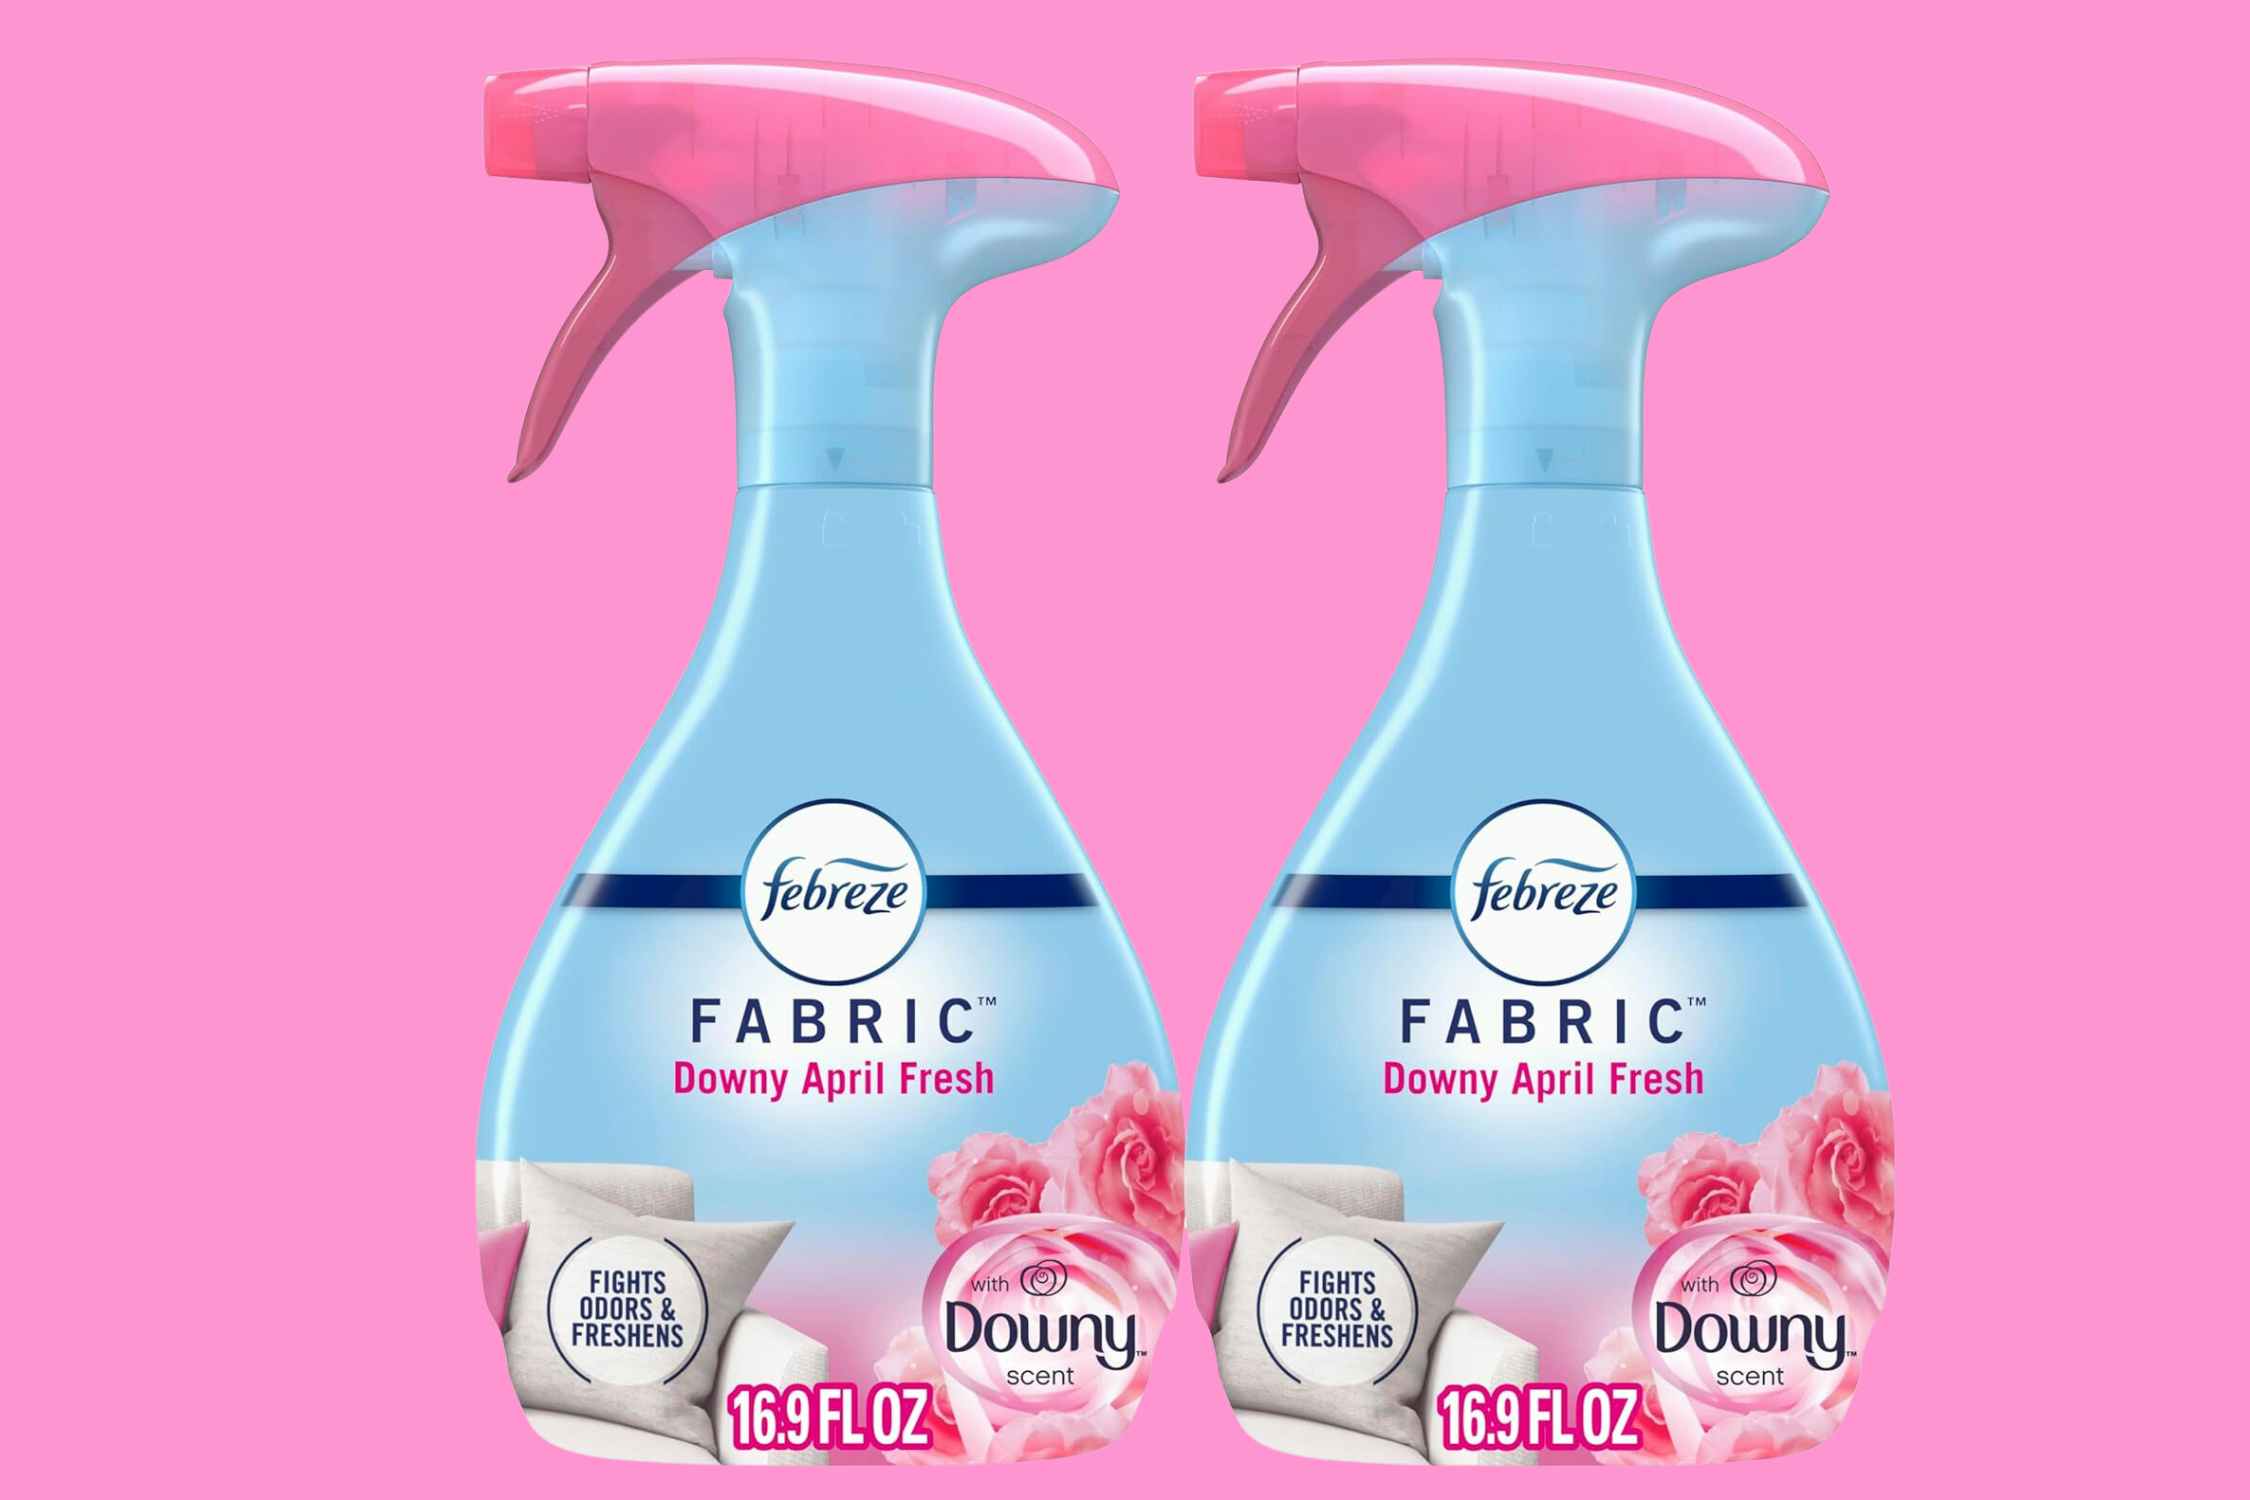 Febreze Fabric Refresher: Get 2 Bottles for as Low as $3.39 on Amazon